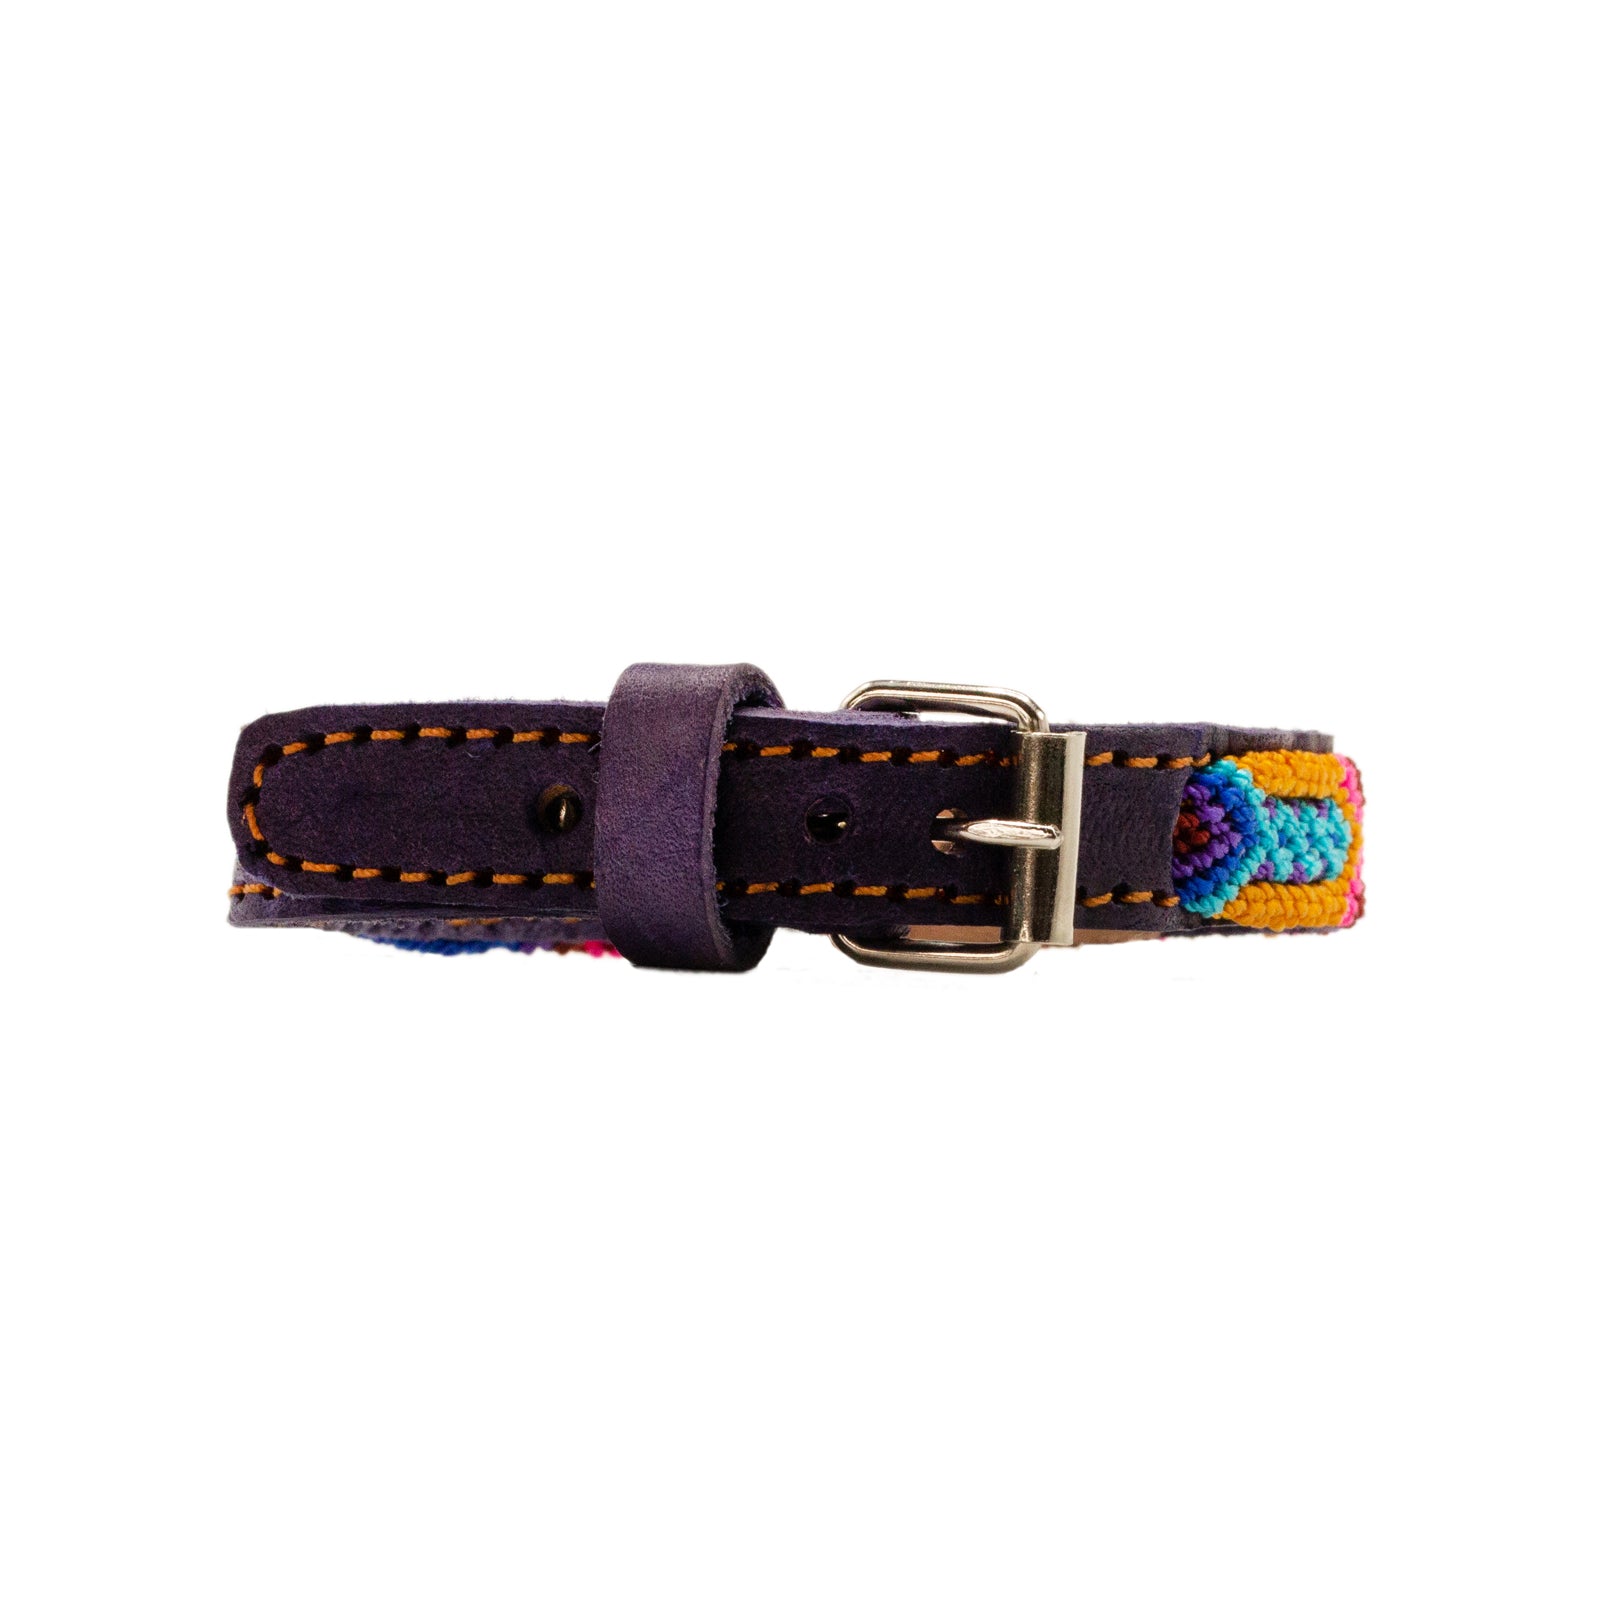 Artisanal leather collar featuring vibrant handwoven patterns